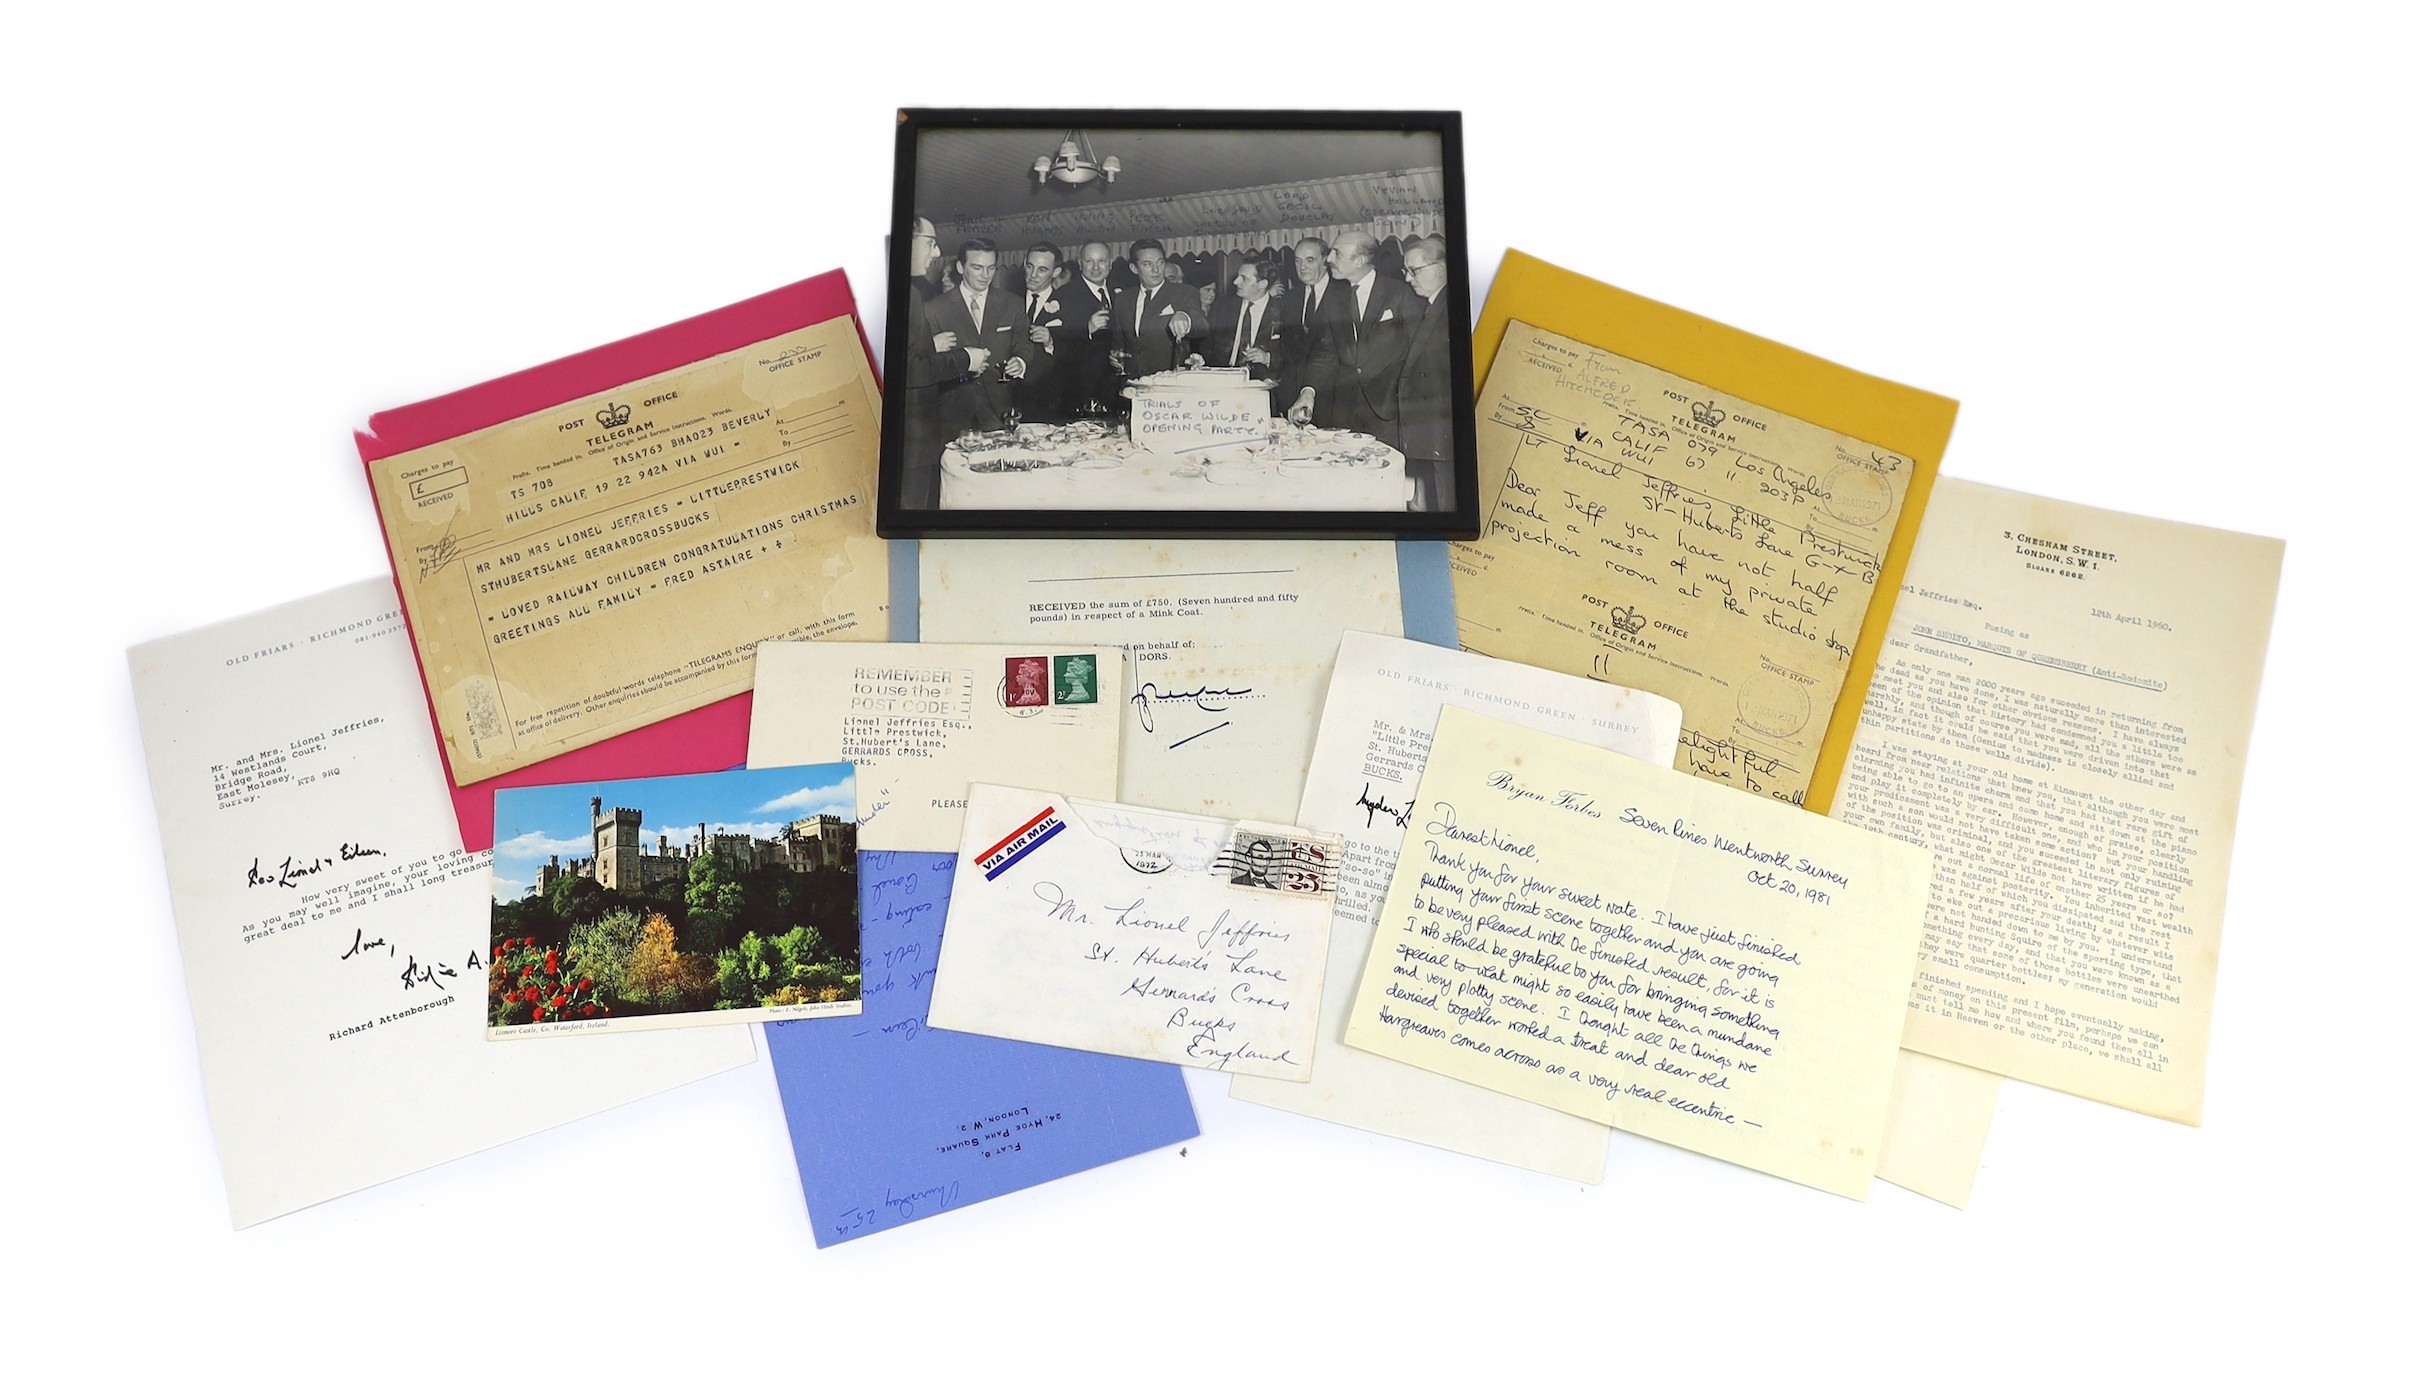 A collection of 13 autograph letters and telegrams to Lionel Jeffries, from 20th century film and theatre celebrities, consisting